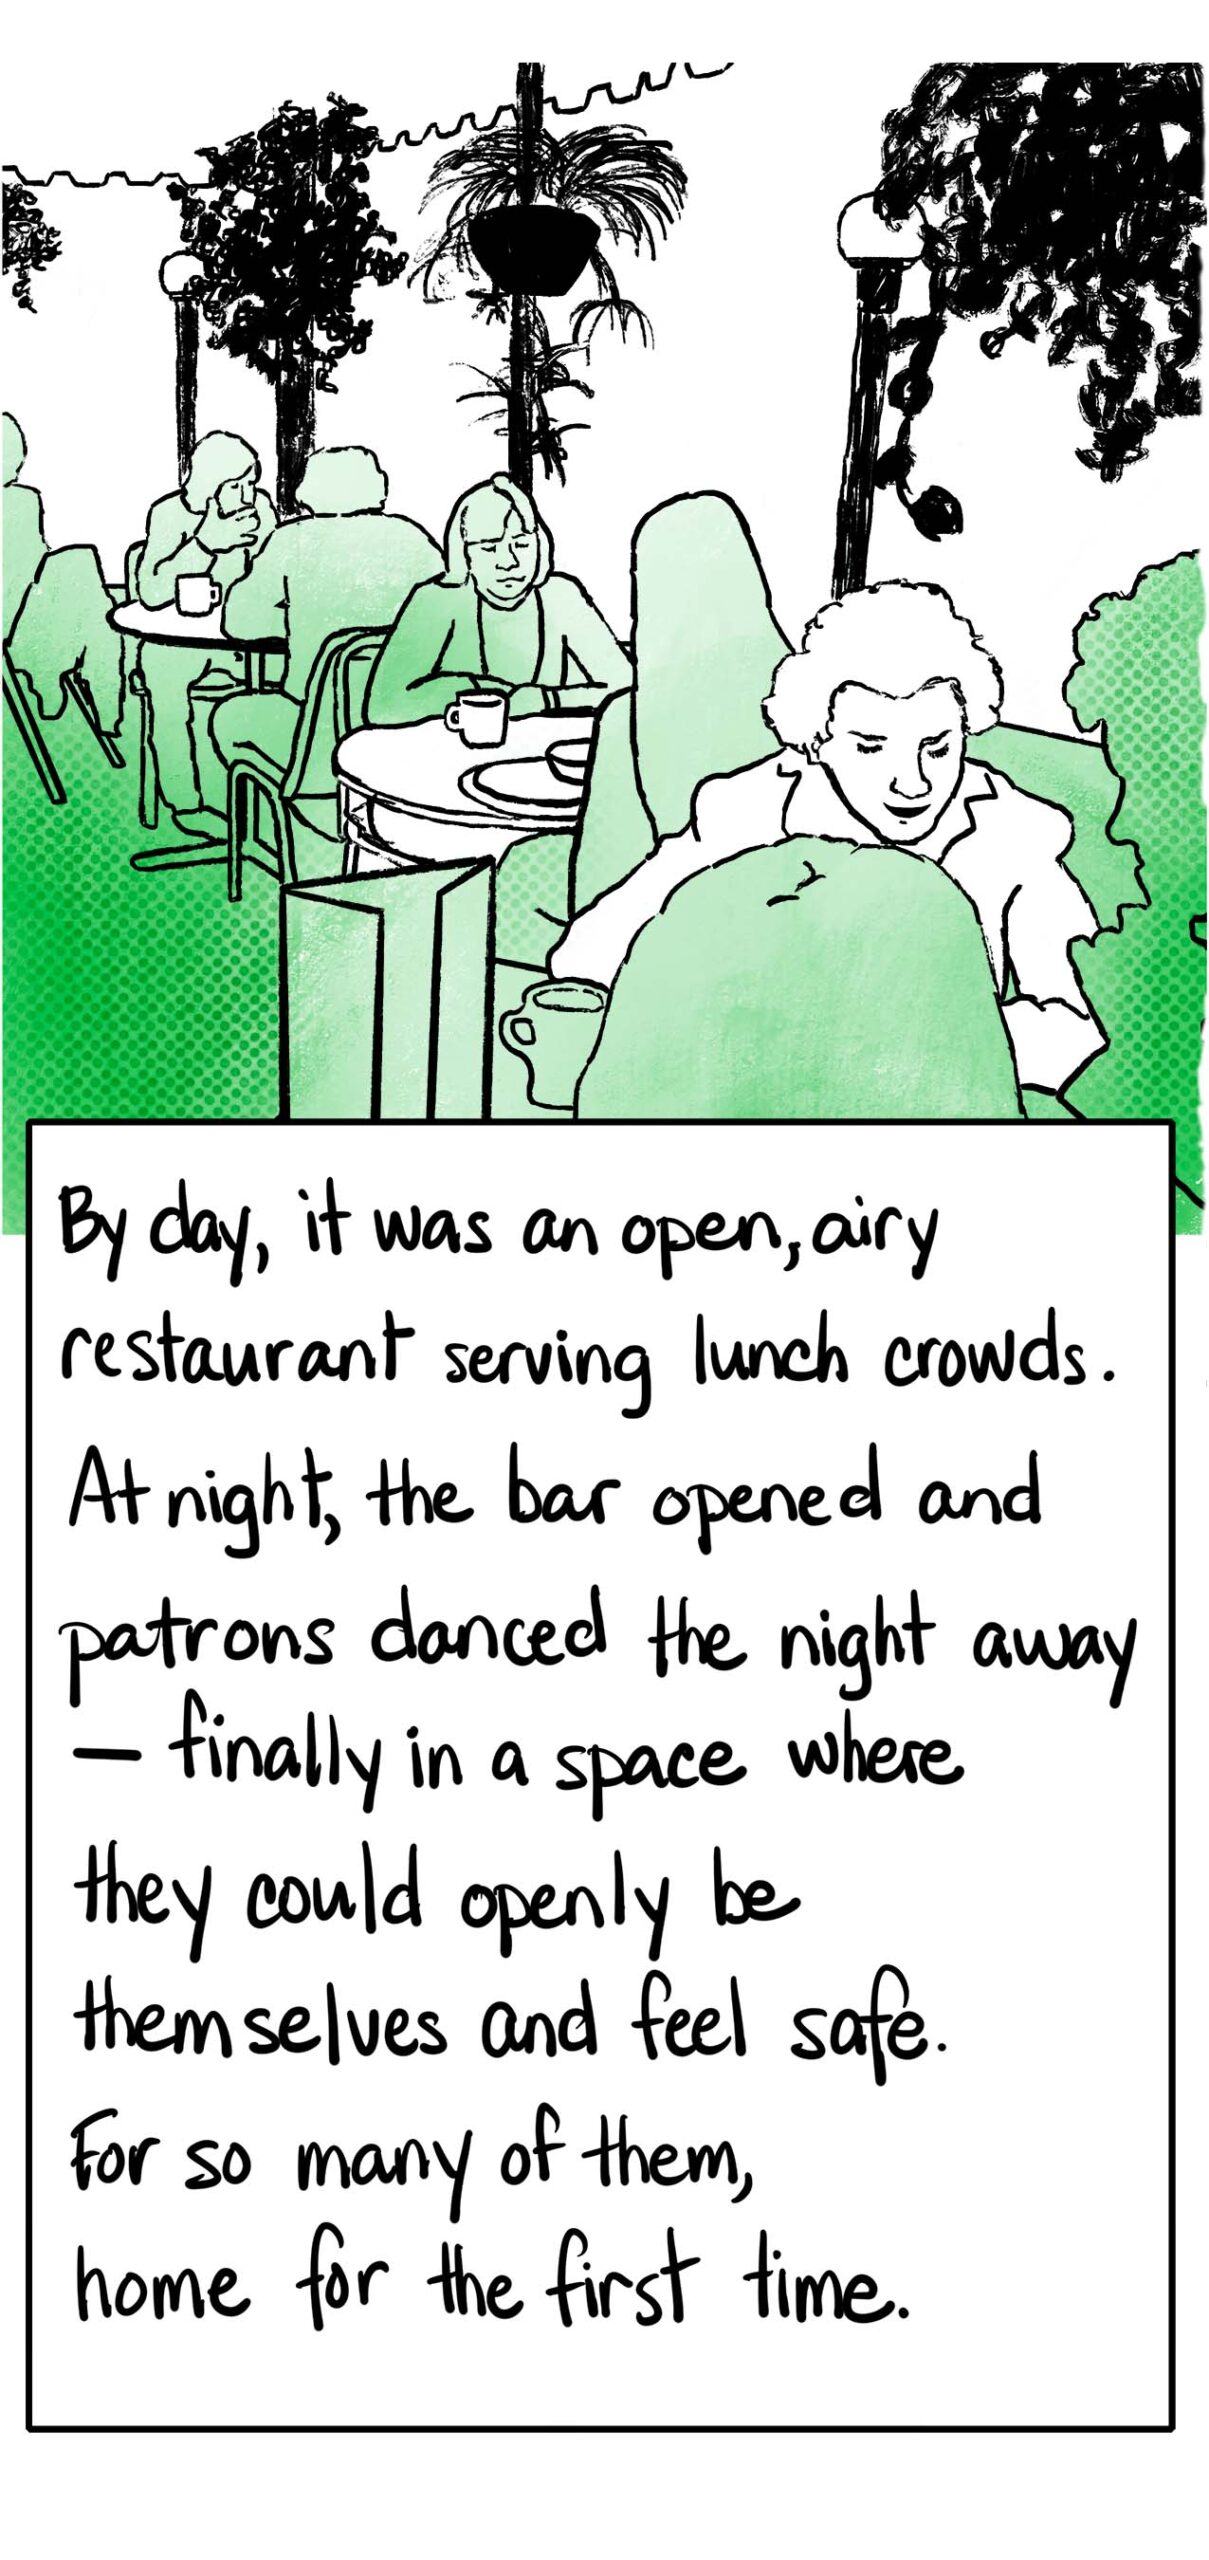 By day, it was an open, airy restaurant serving lunch crowds. At night, the bar opened and patrons danced the night away – finally in a space where they could openly be themselves and feel safe. For so many of them, home for the first time. Illustration of people dining outside surrounded by plants.